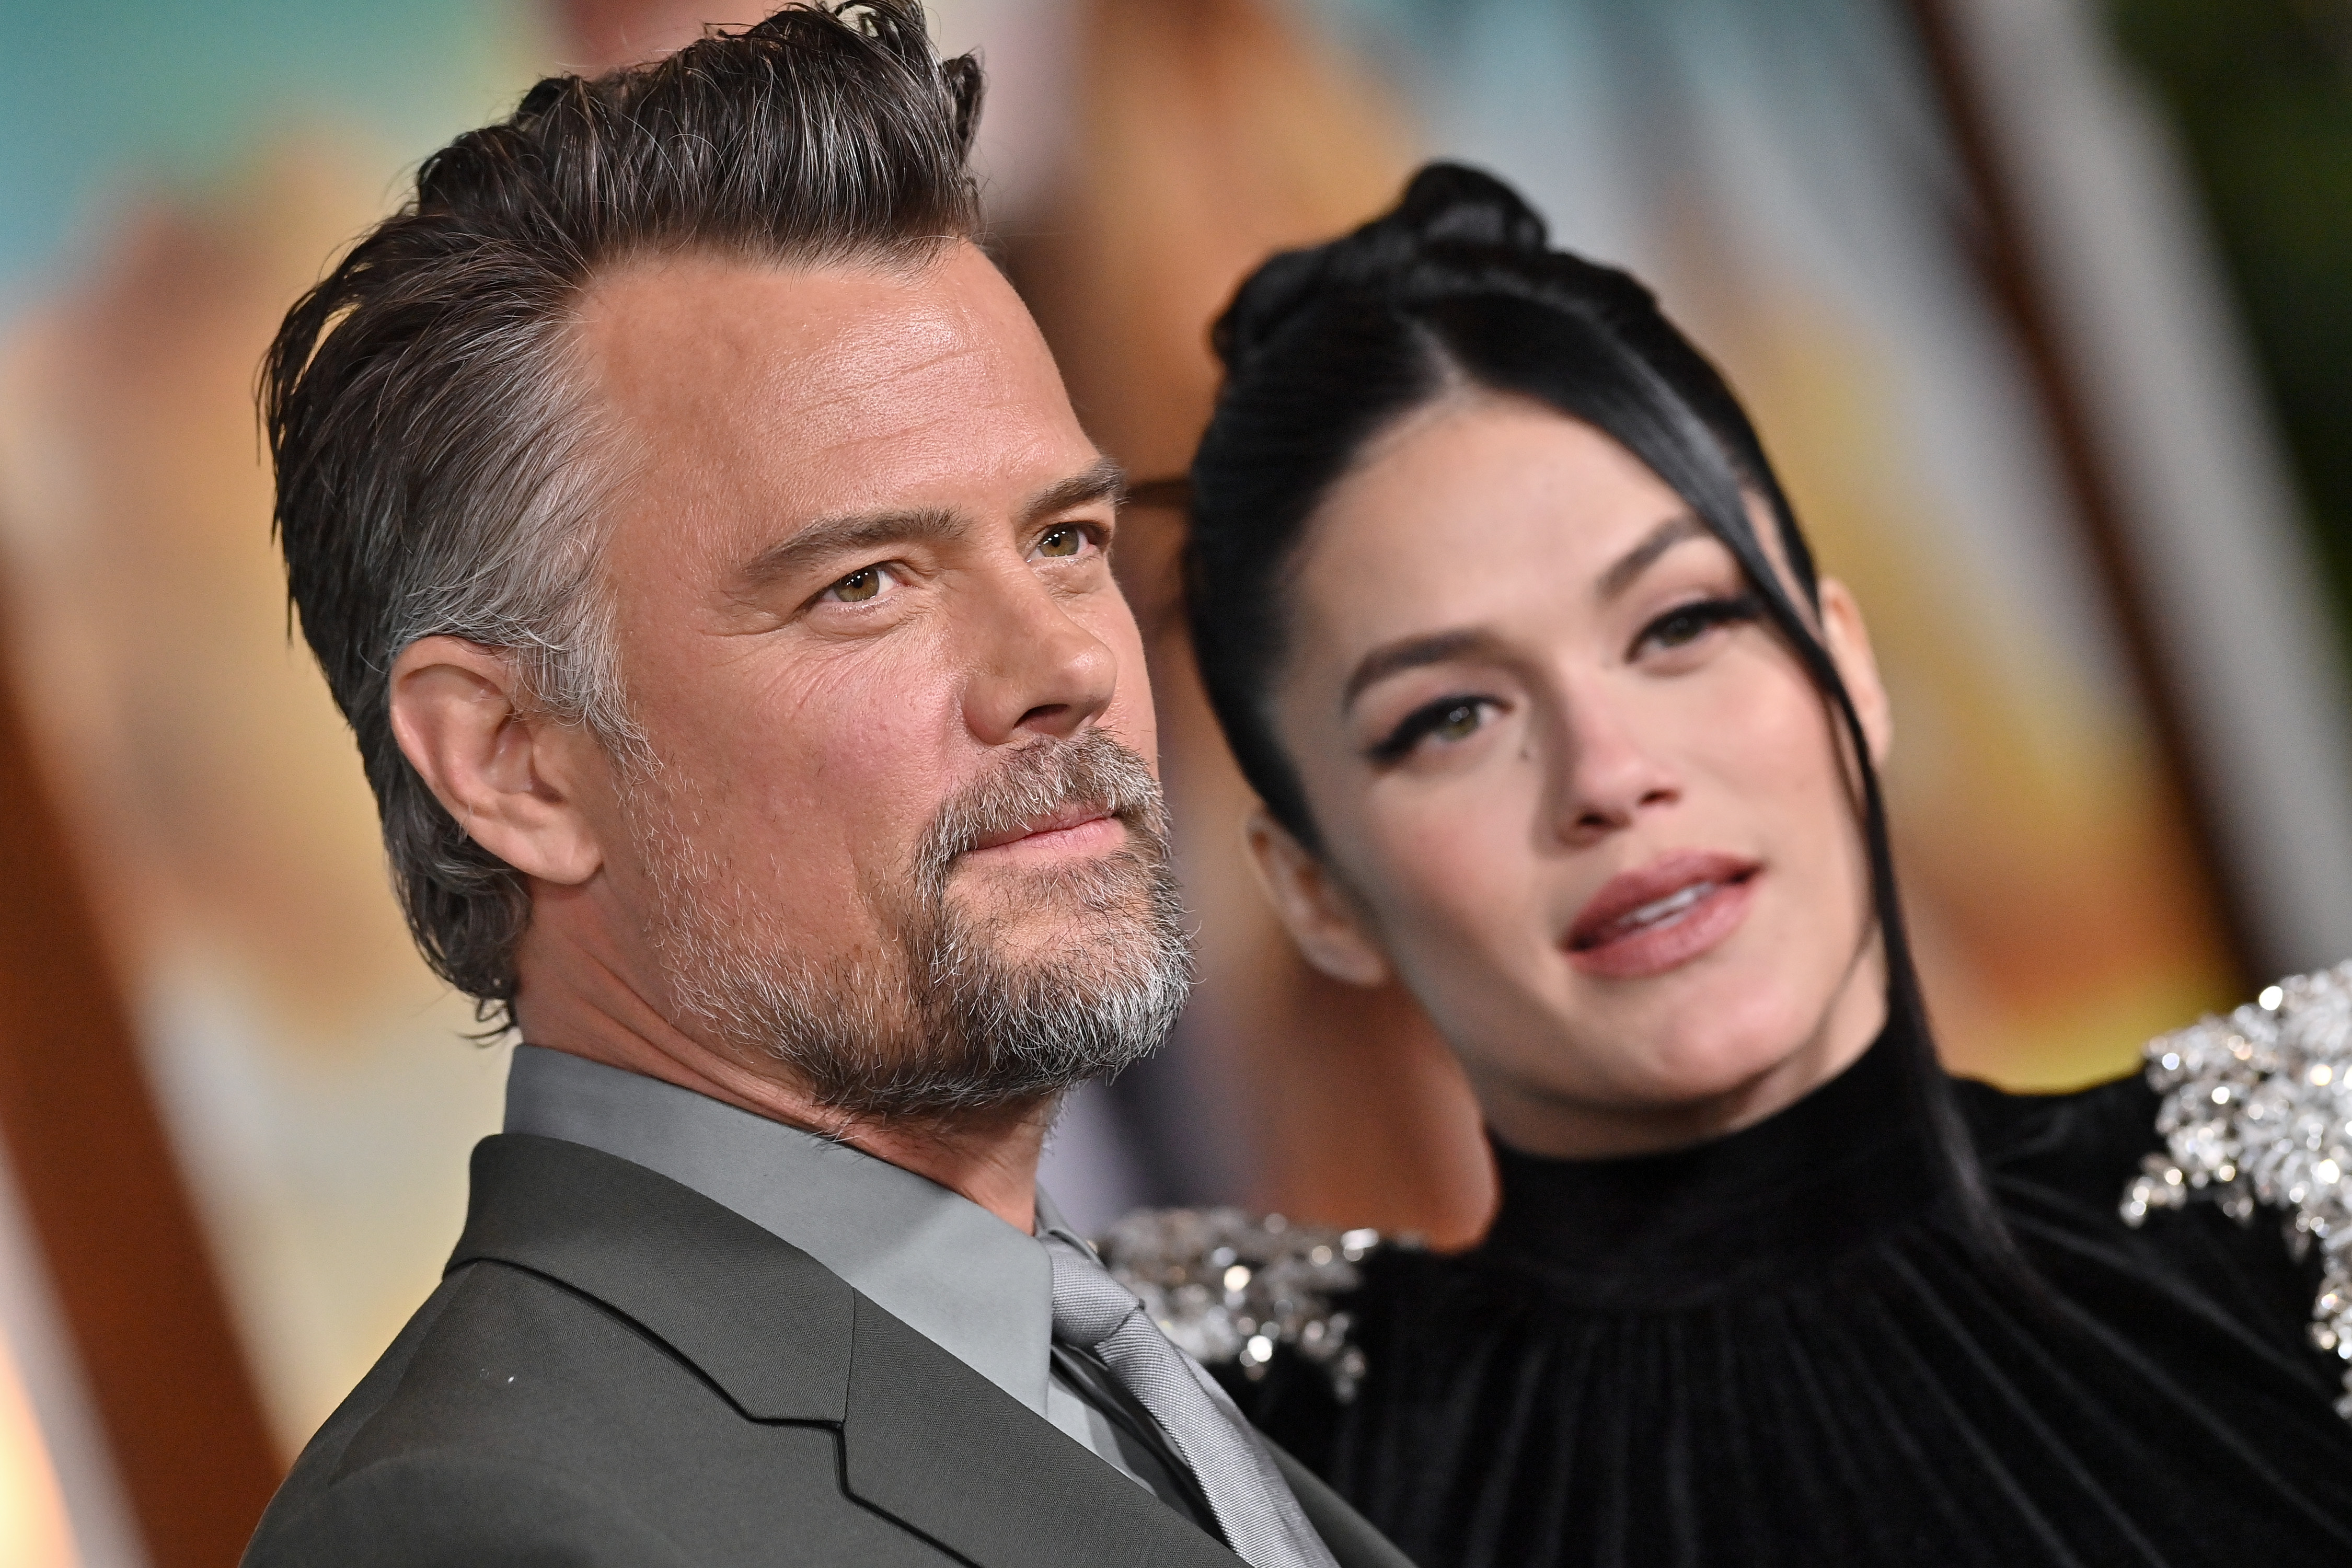 Josh Duhamel and Audra Mari attend the Los Angeles premiere of "Shotgun Wedding" at TCL Chinese Theatre on January 18, 2023 in Hollywood, California | Source: Getty Images